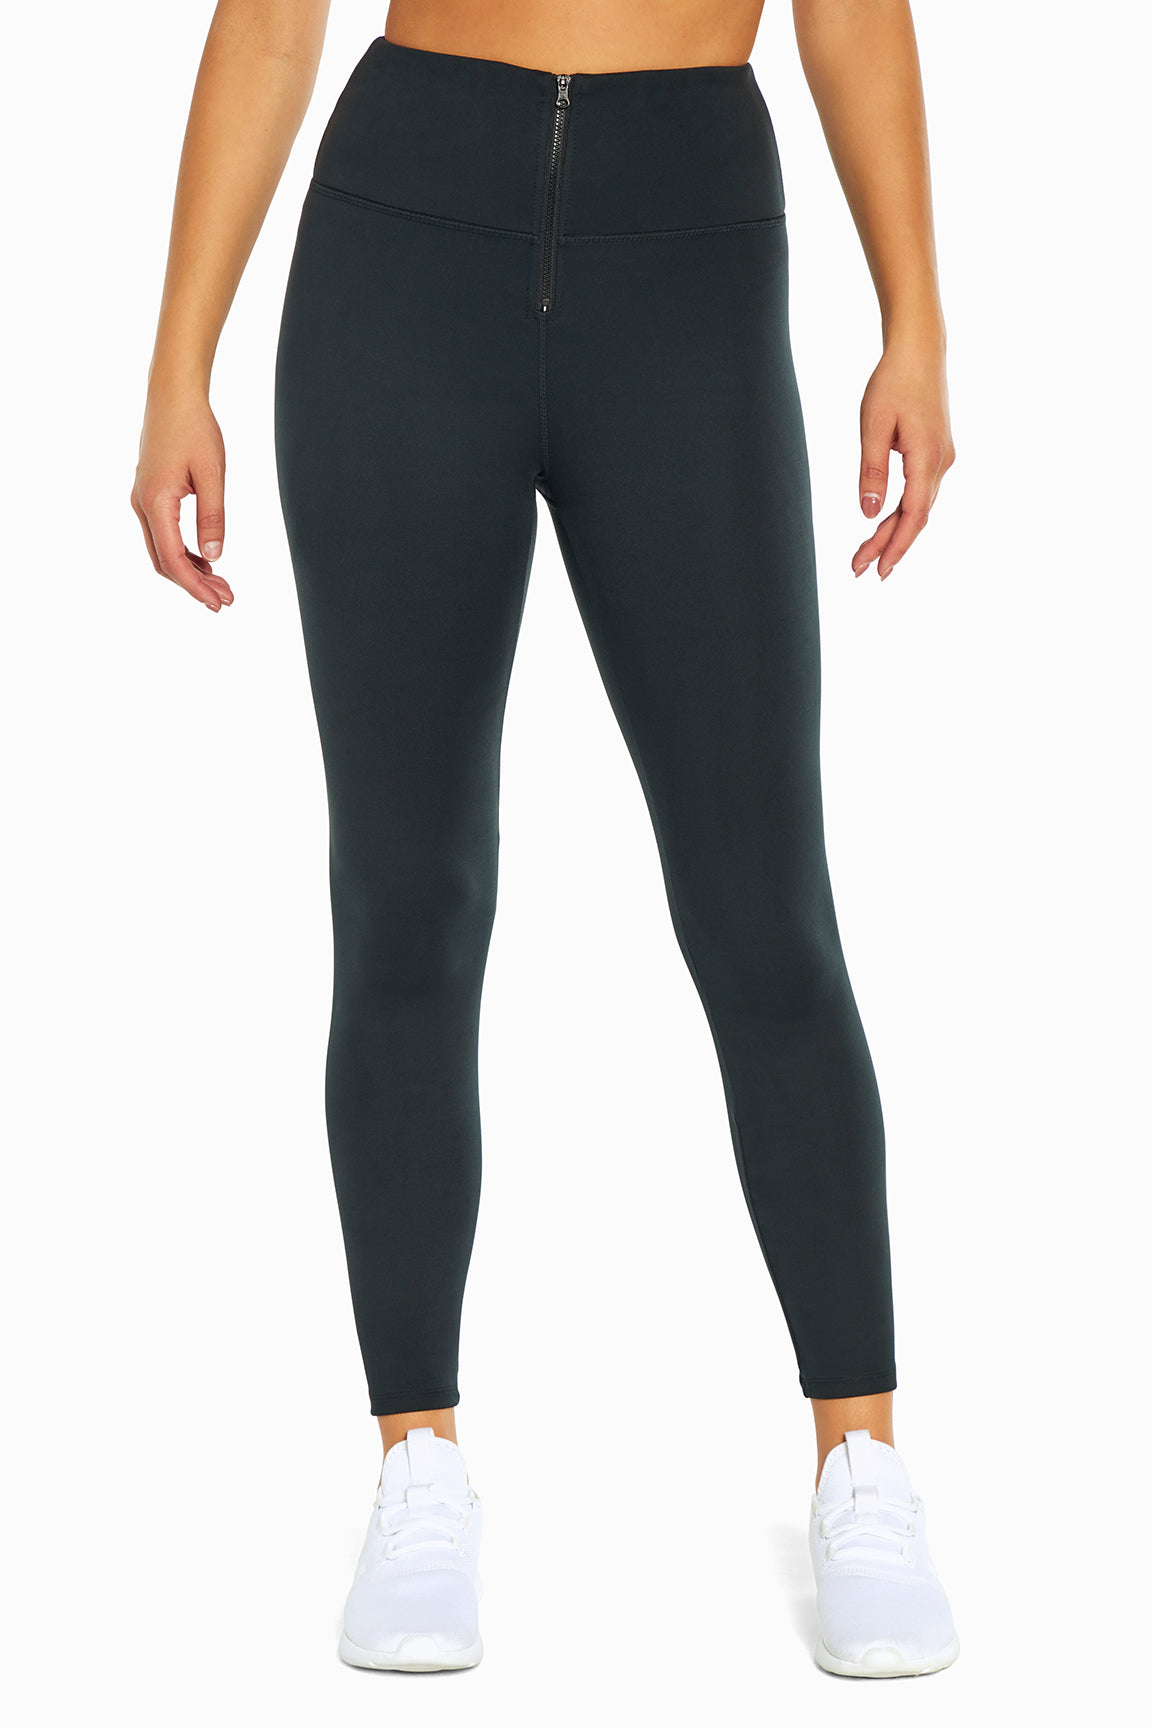 Pearl knitwear €16 Spanx dupe leggings - Style In The City